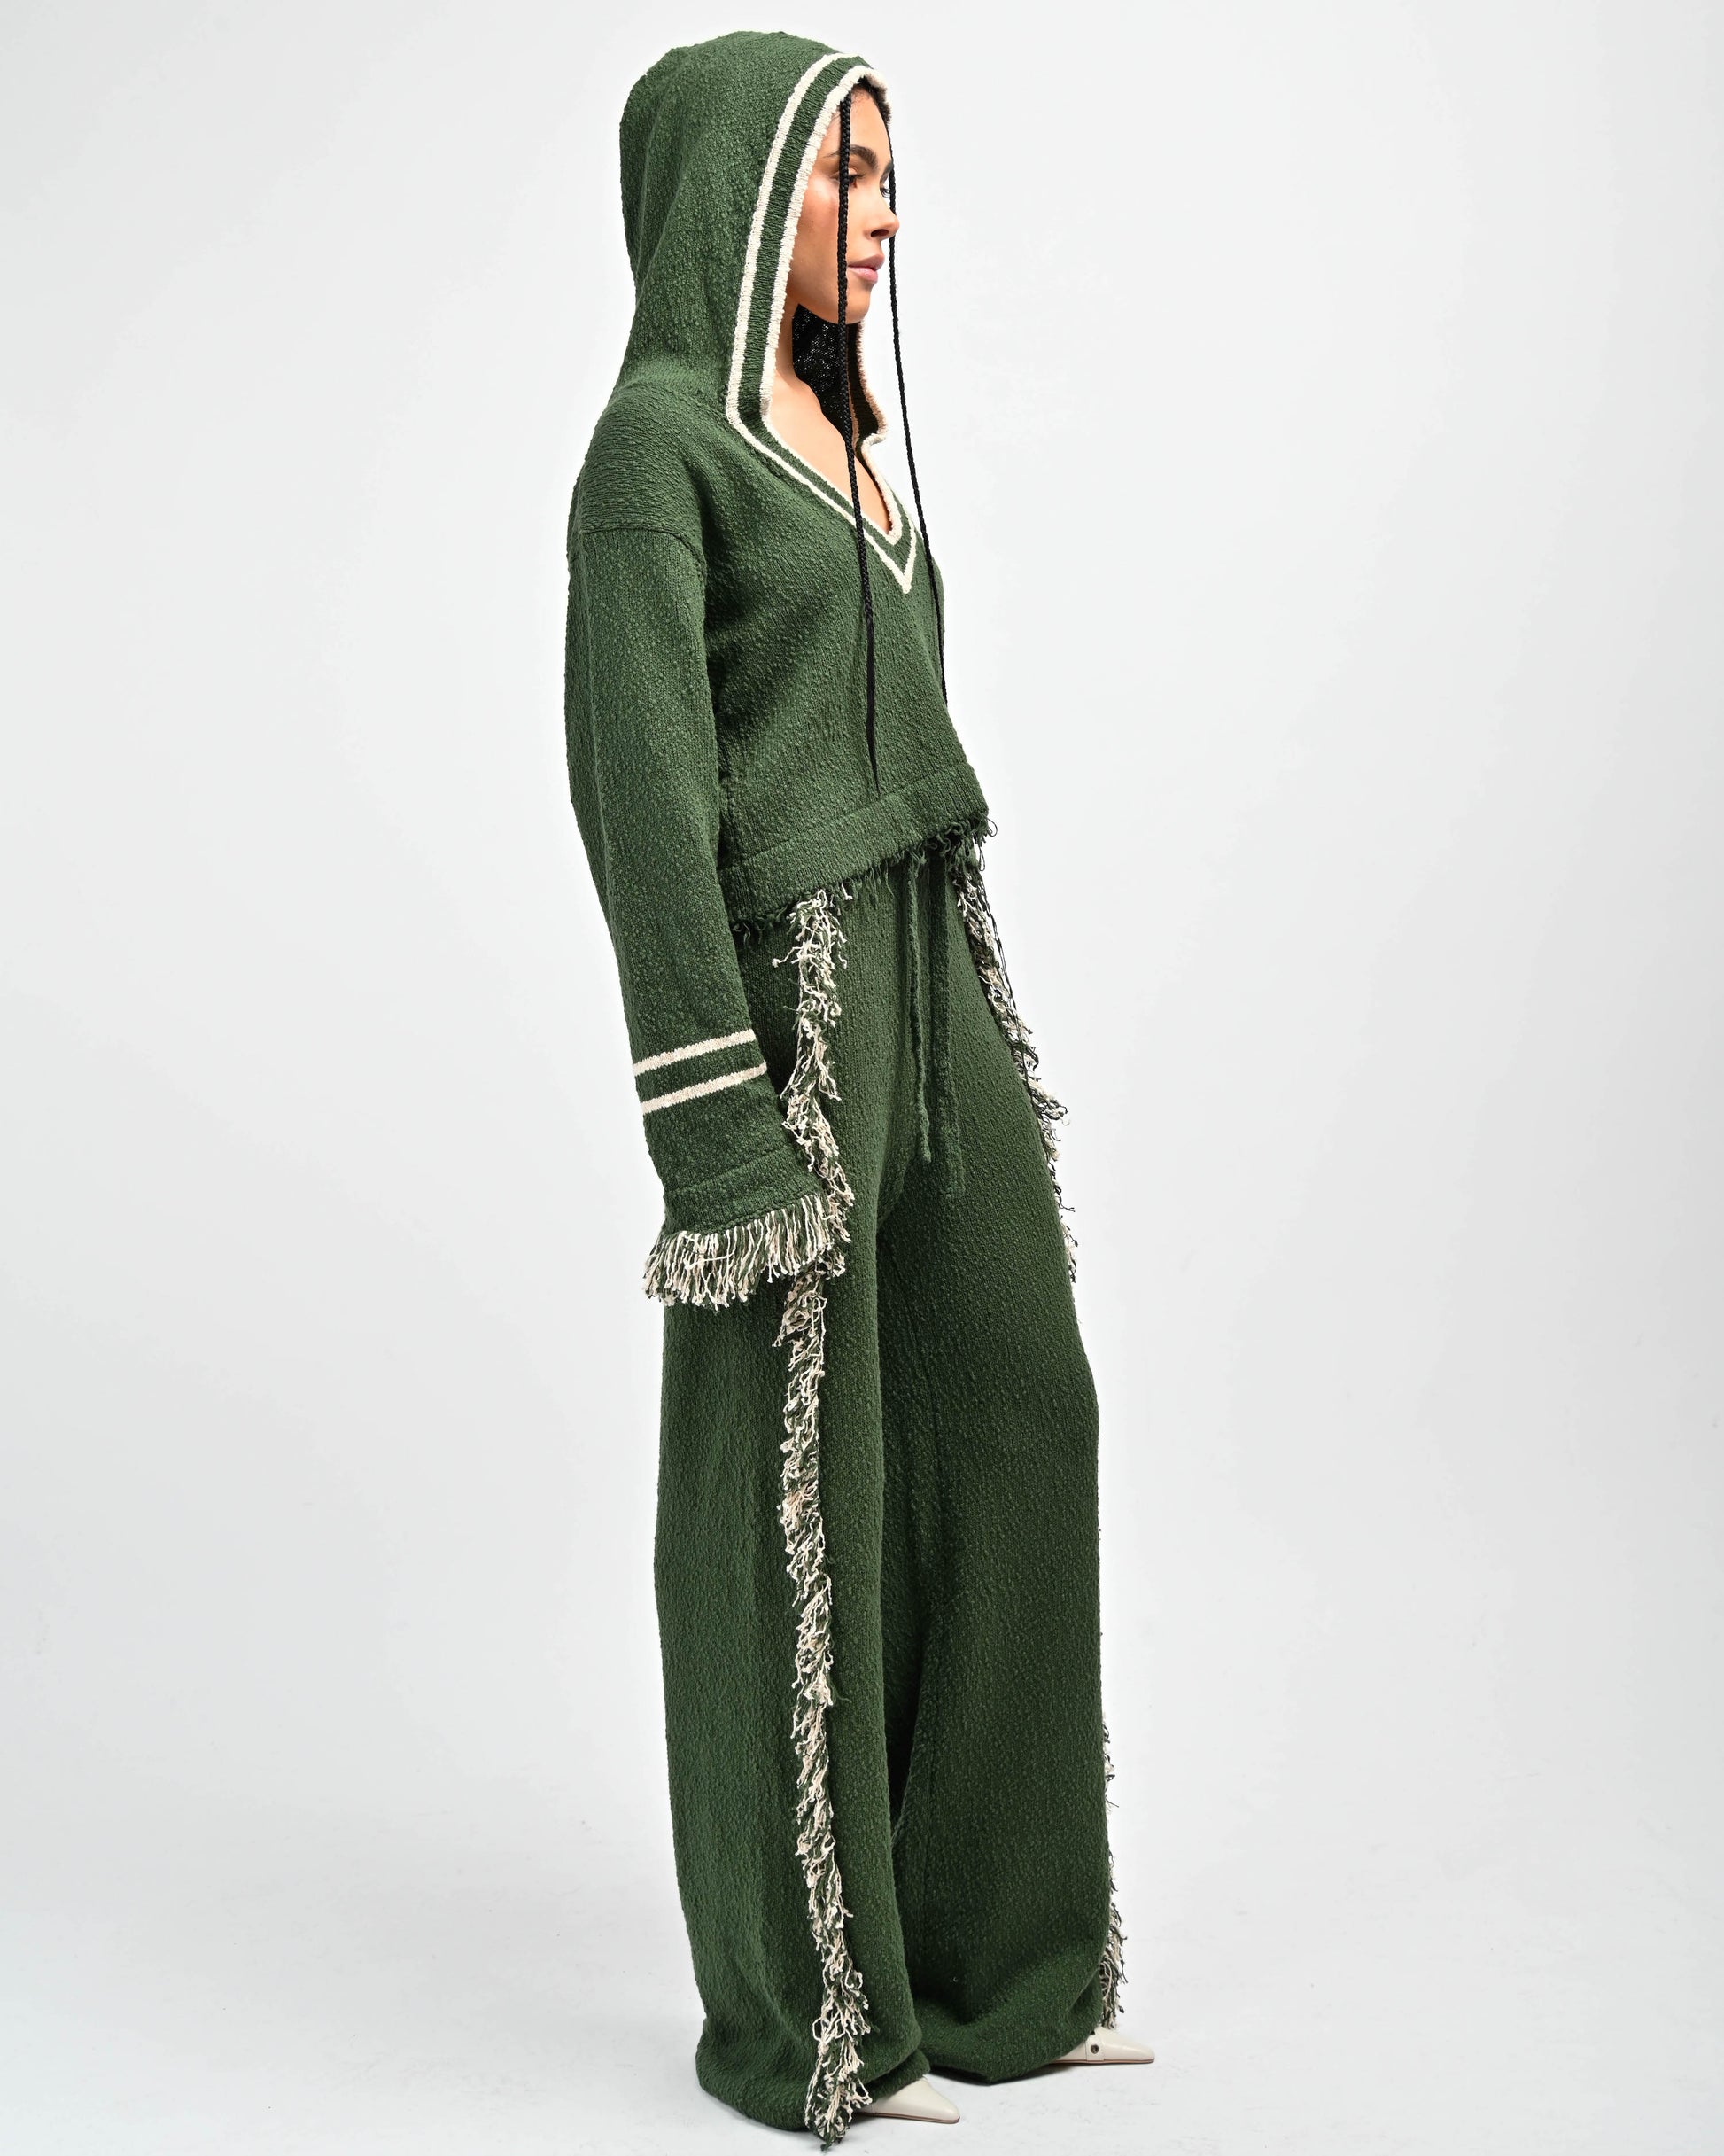 Side View of Model in Andry Fringe Knit Hoodie and Andy Fringe Knit Pants in color green by Aseye Studio